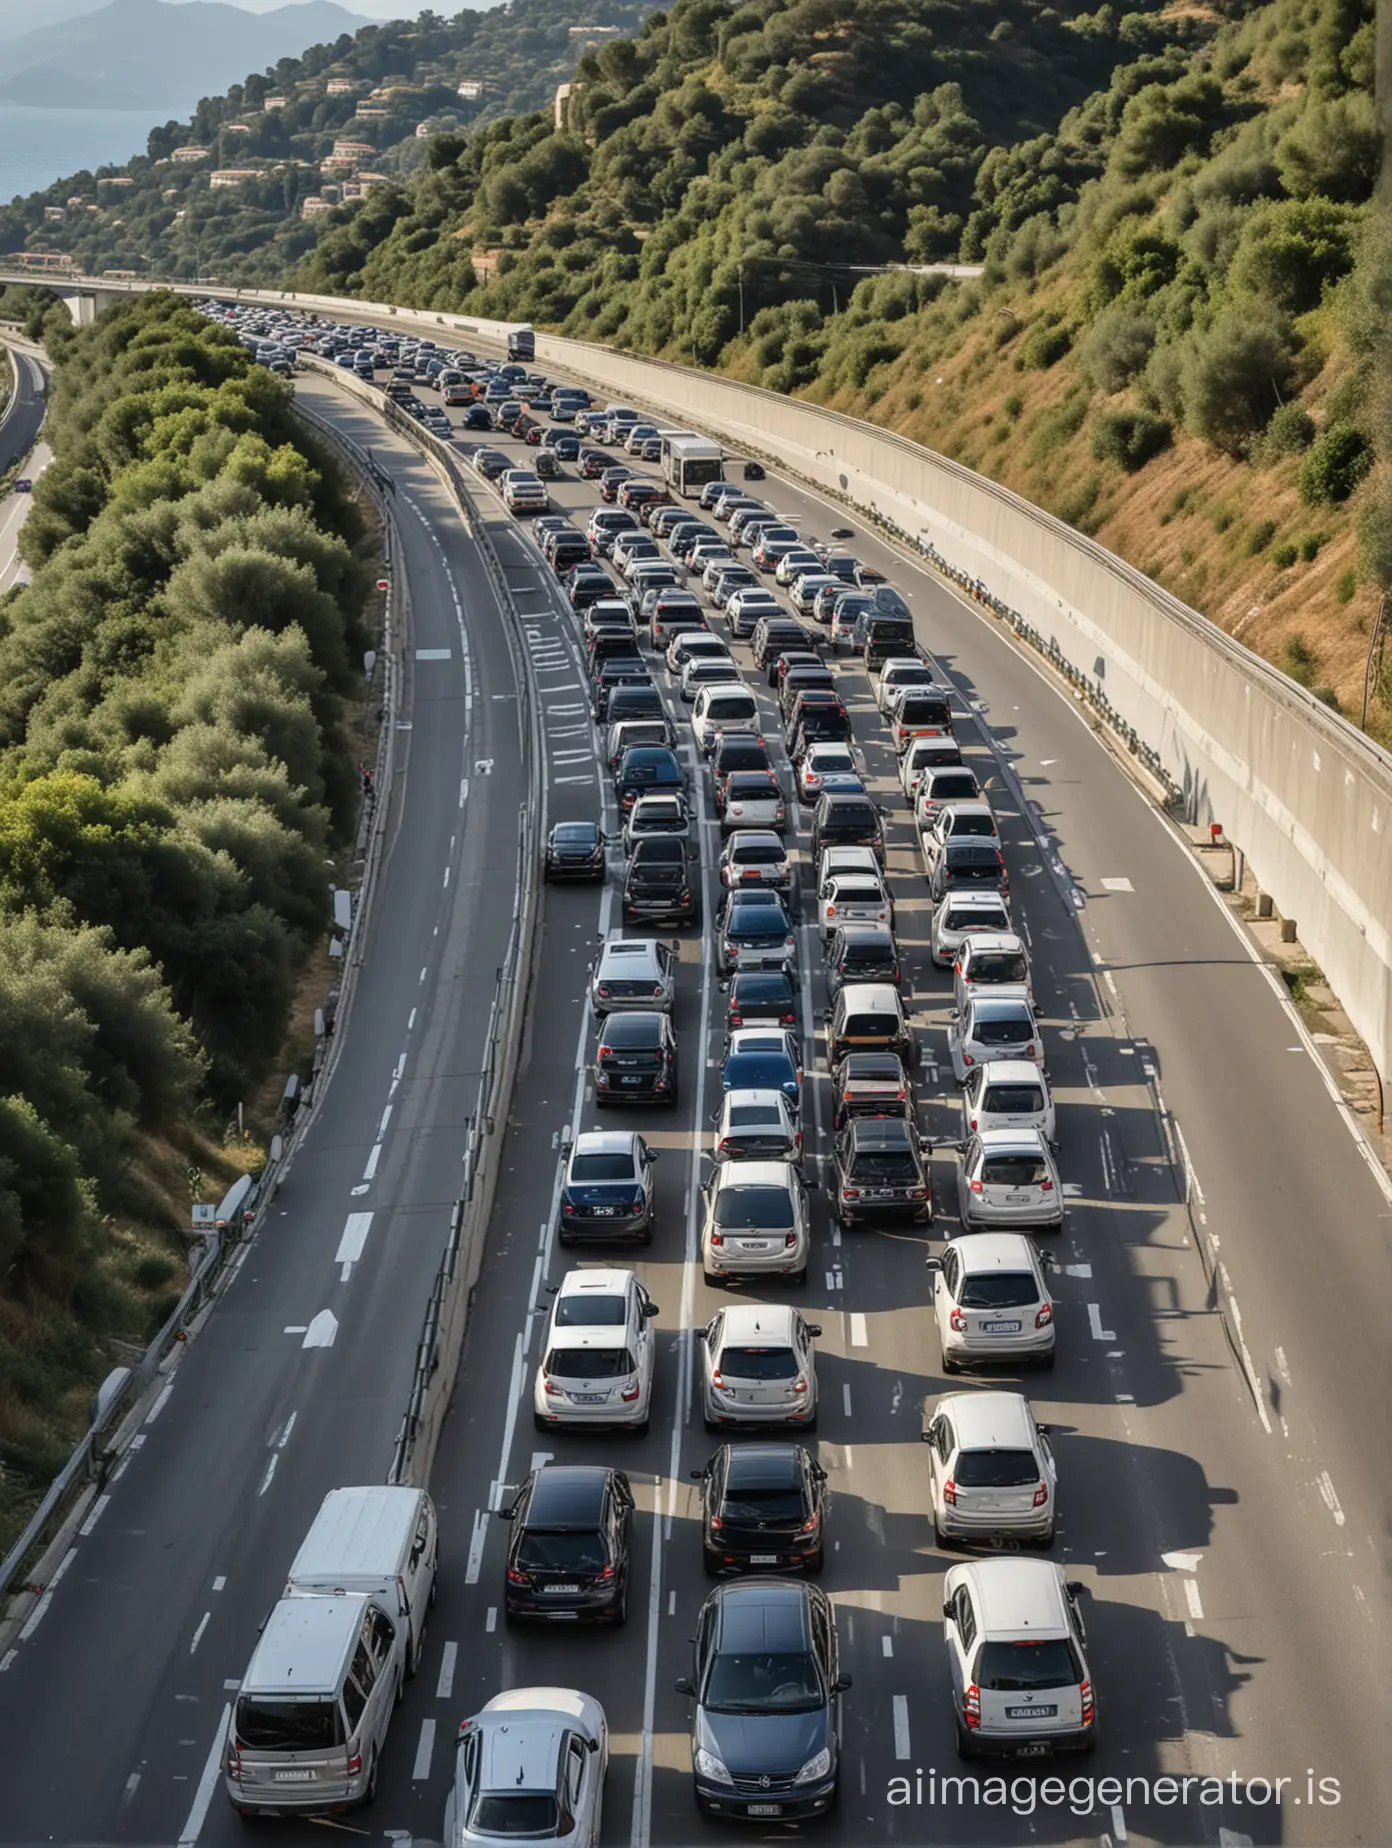 kilometers of queue on the Ligurian motorway, typical surrounding Italian landscape. drivers try to reach seaside destinations, the wait is too long and so they get out of their cars and sunbathe on the motorway